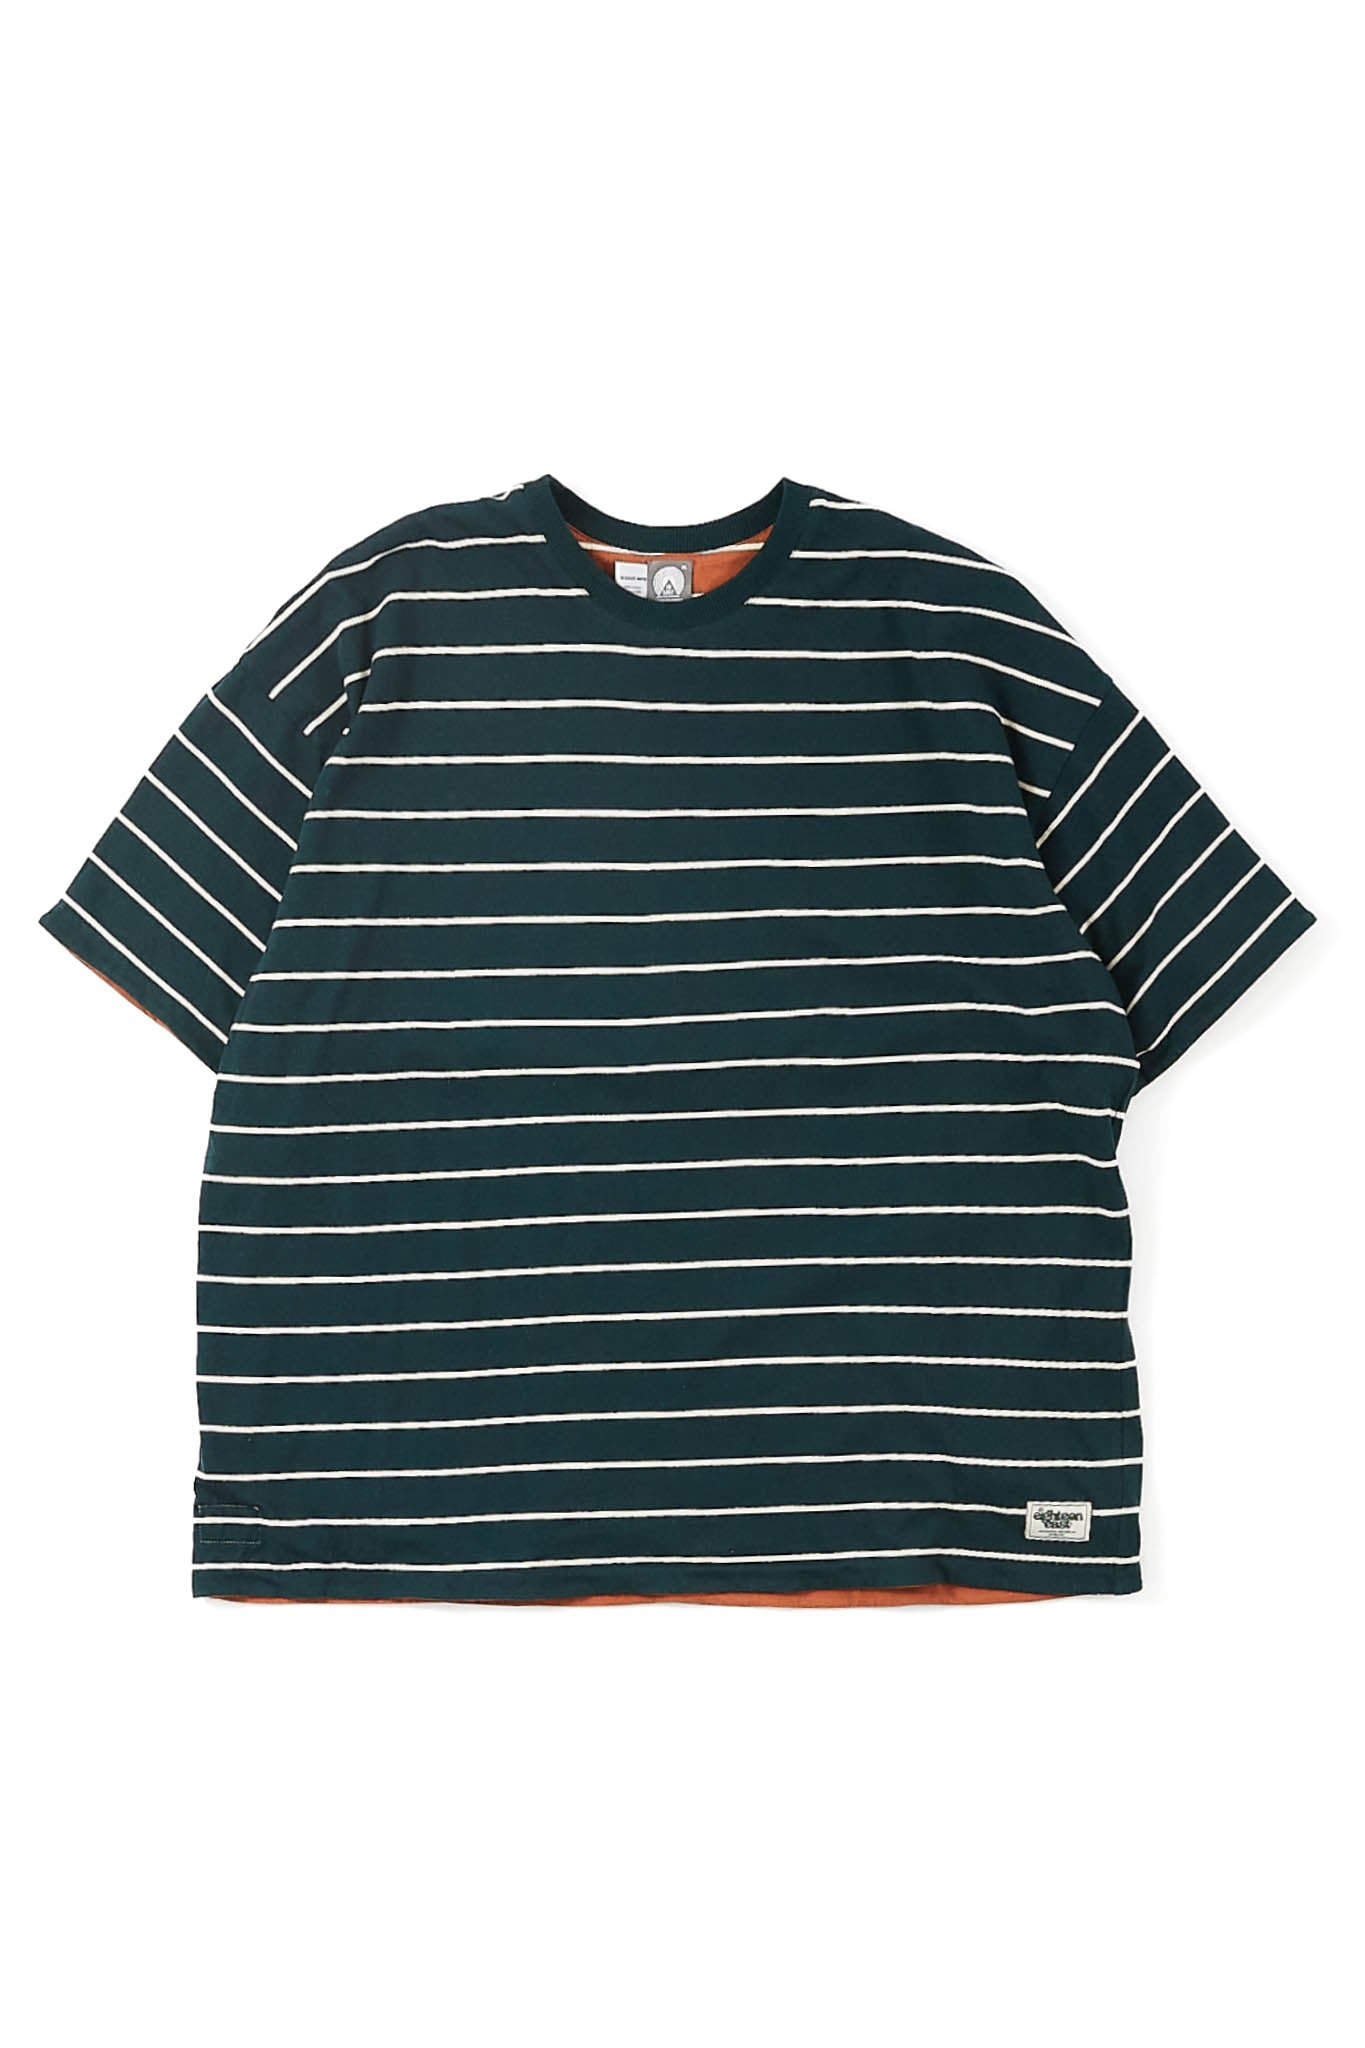 S/S KYO REVERSIBLE TEE  - BOTTLE GREEN / RUSSET / WHITE STRIPED JERSEY